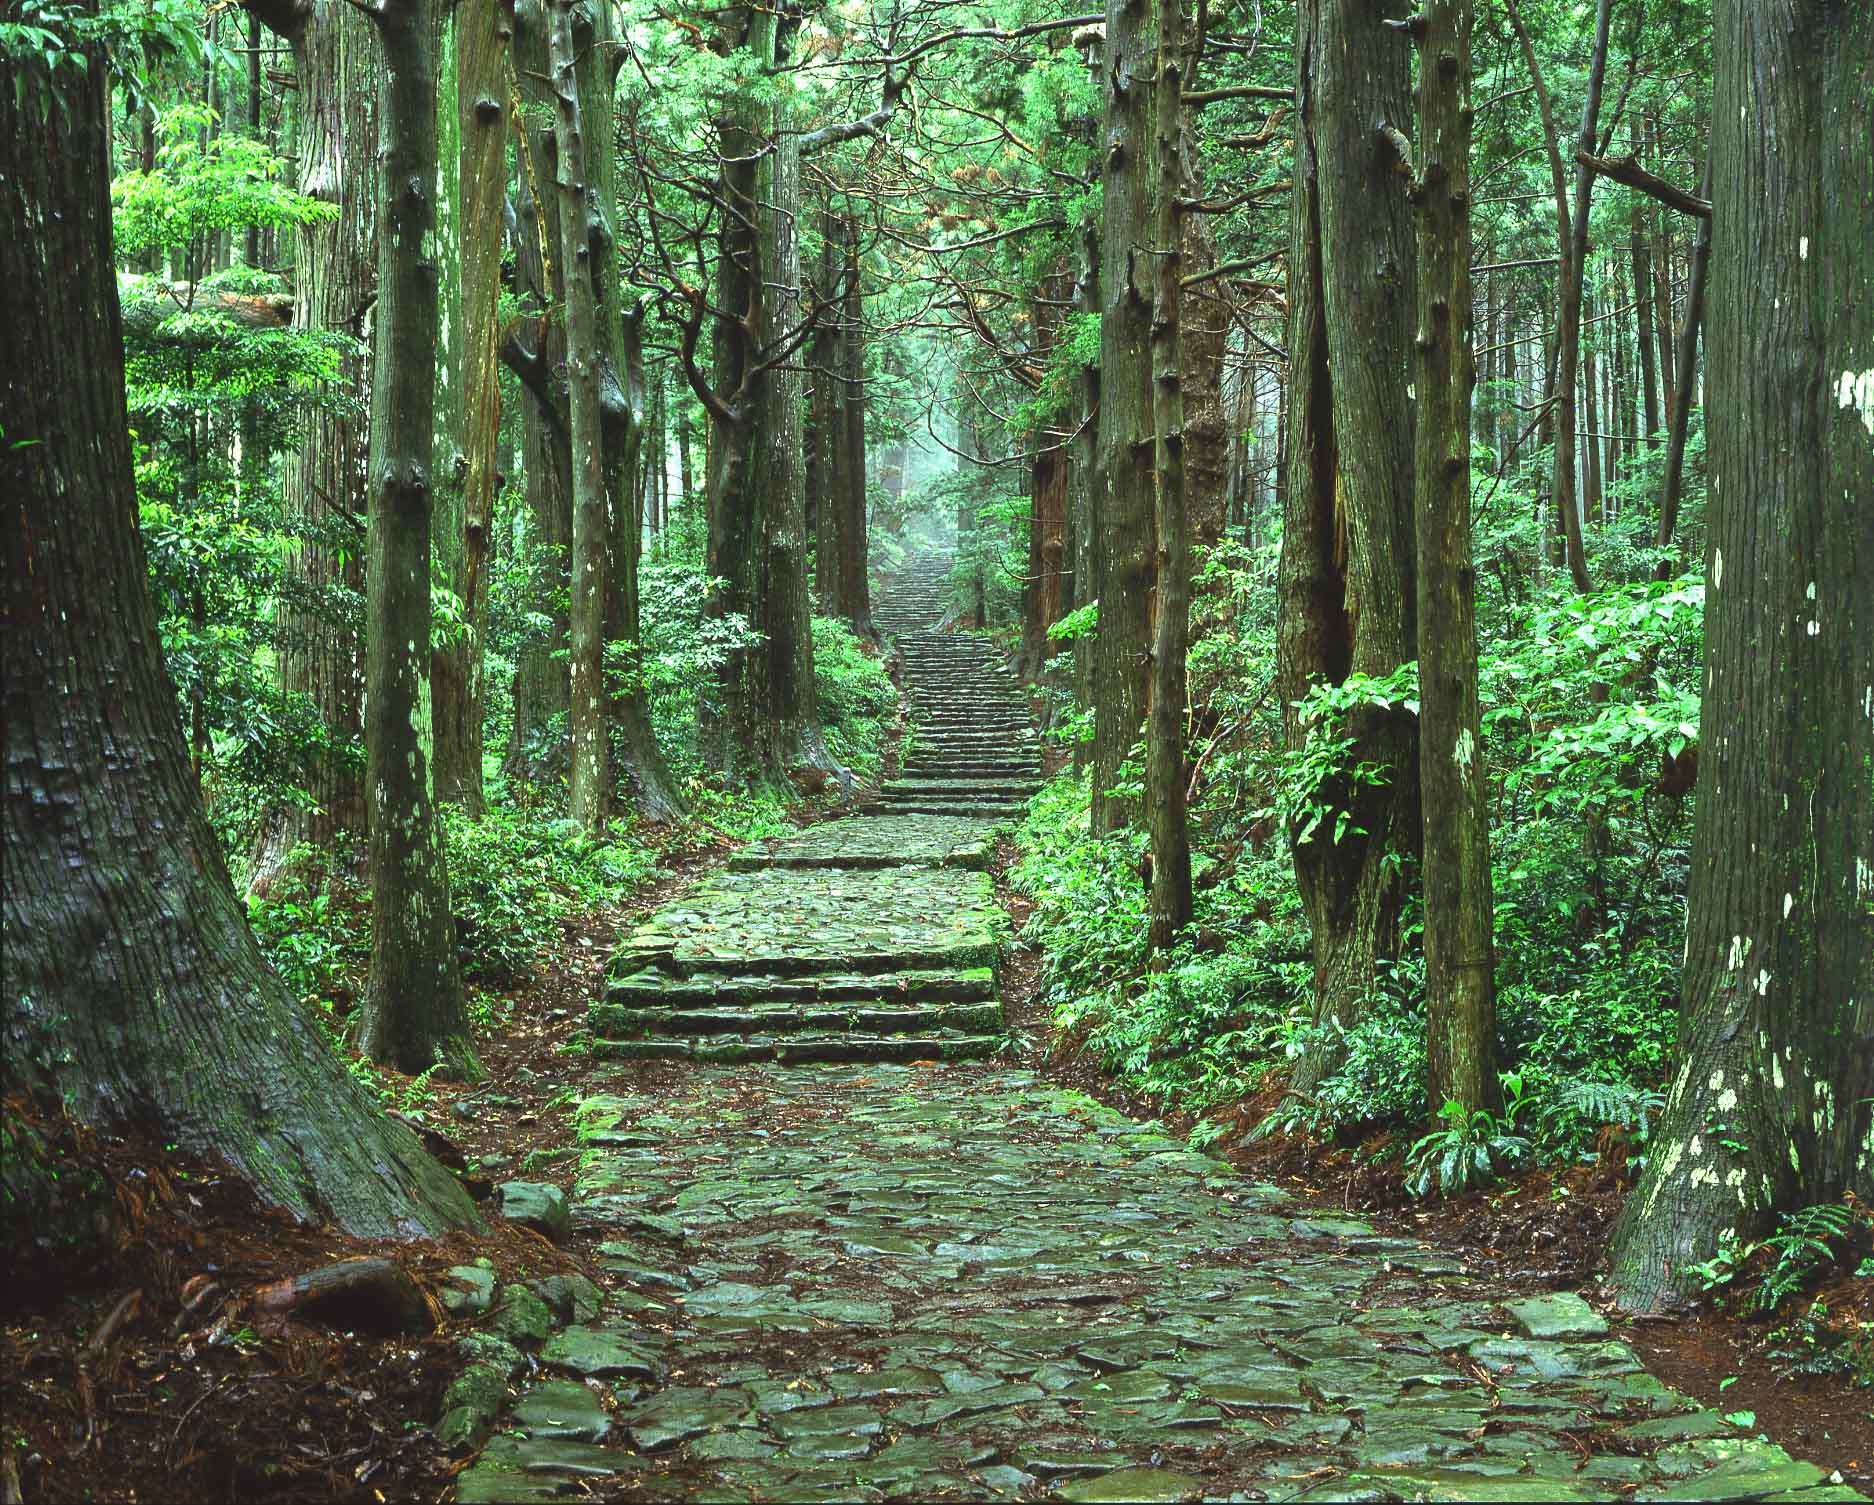 The ancient pilgrimage road to the three Grand Shrines of Kumano is enveloped in a bracing atmosphere.

